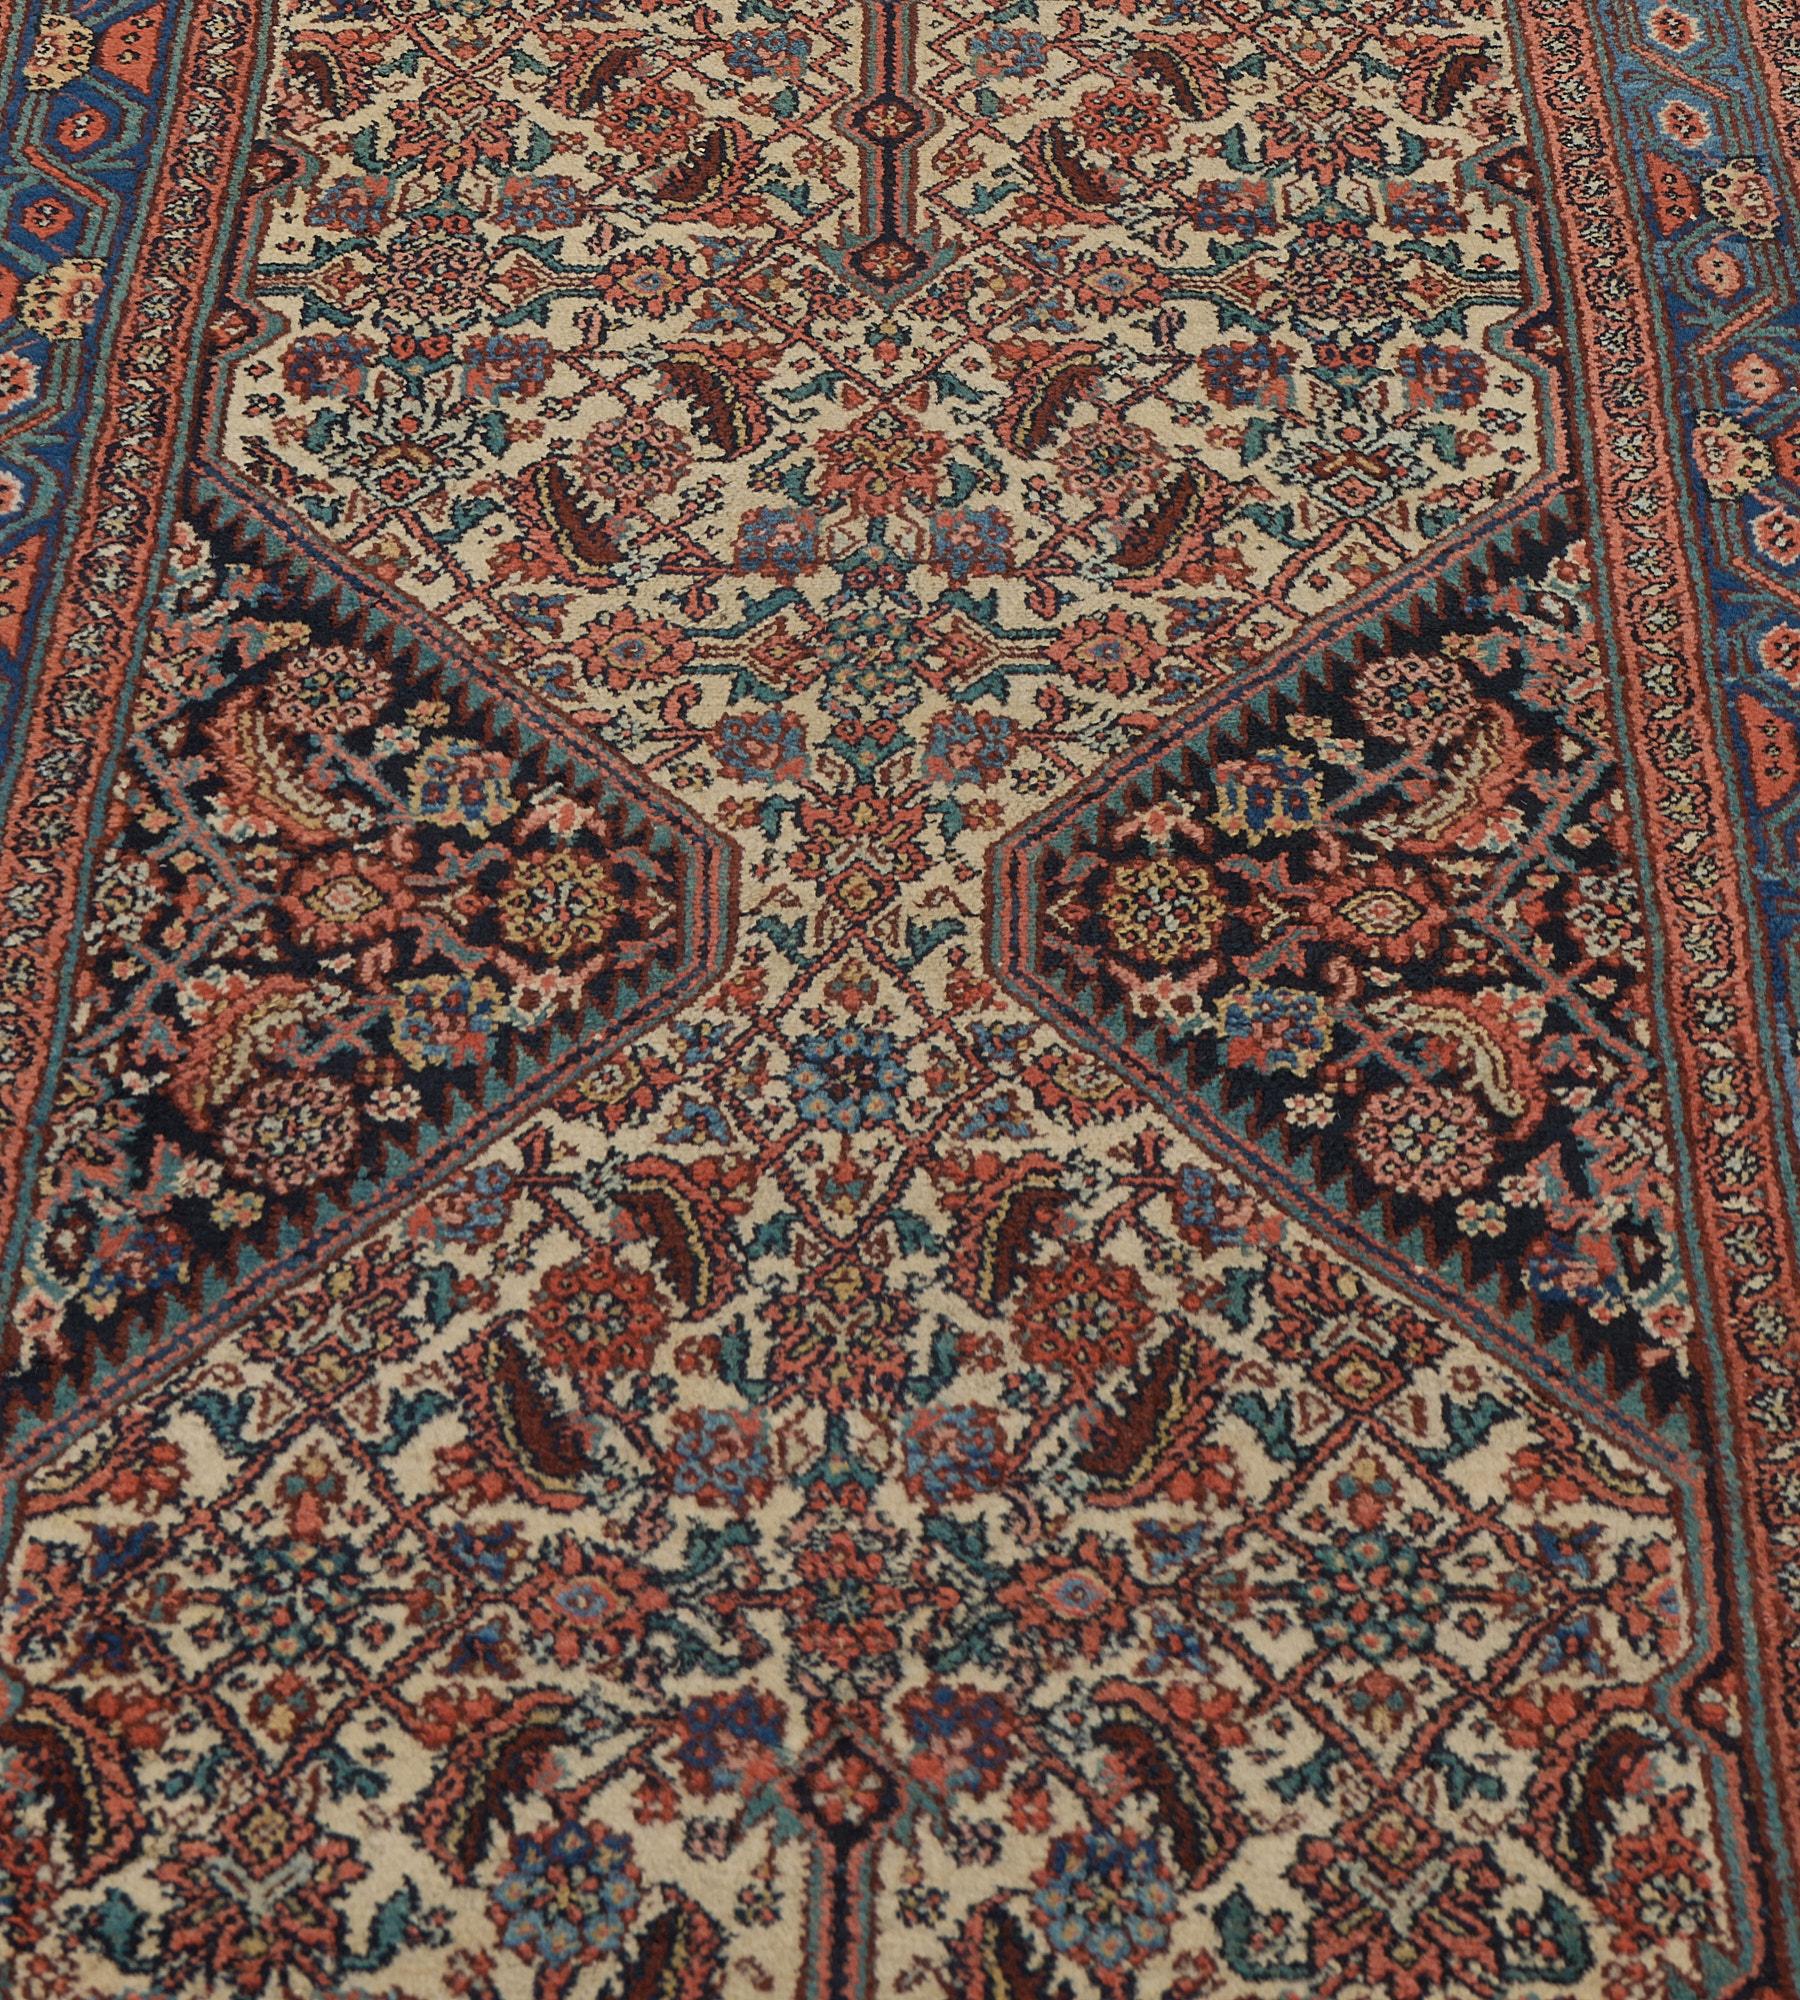 20th Century Authentic Antique Circa-1900 Handwoven Wool Persian Serab Runner For Sale